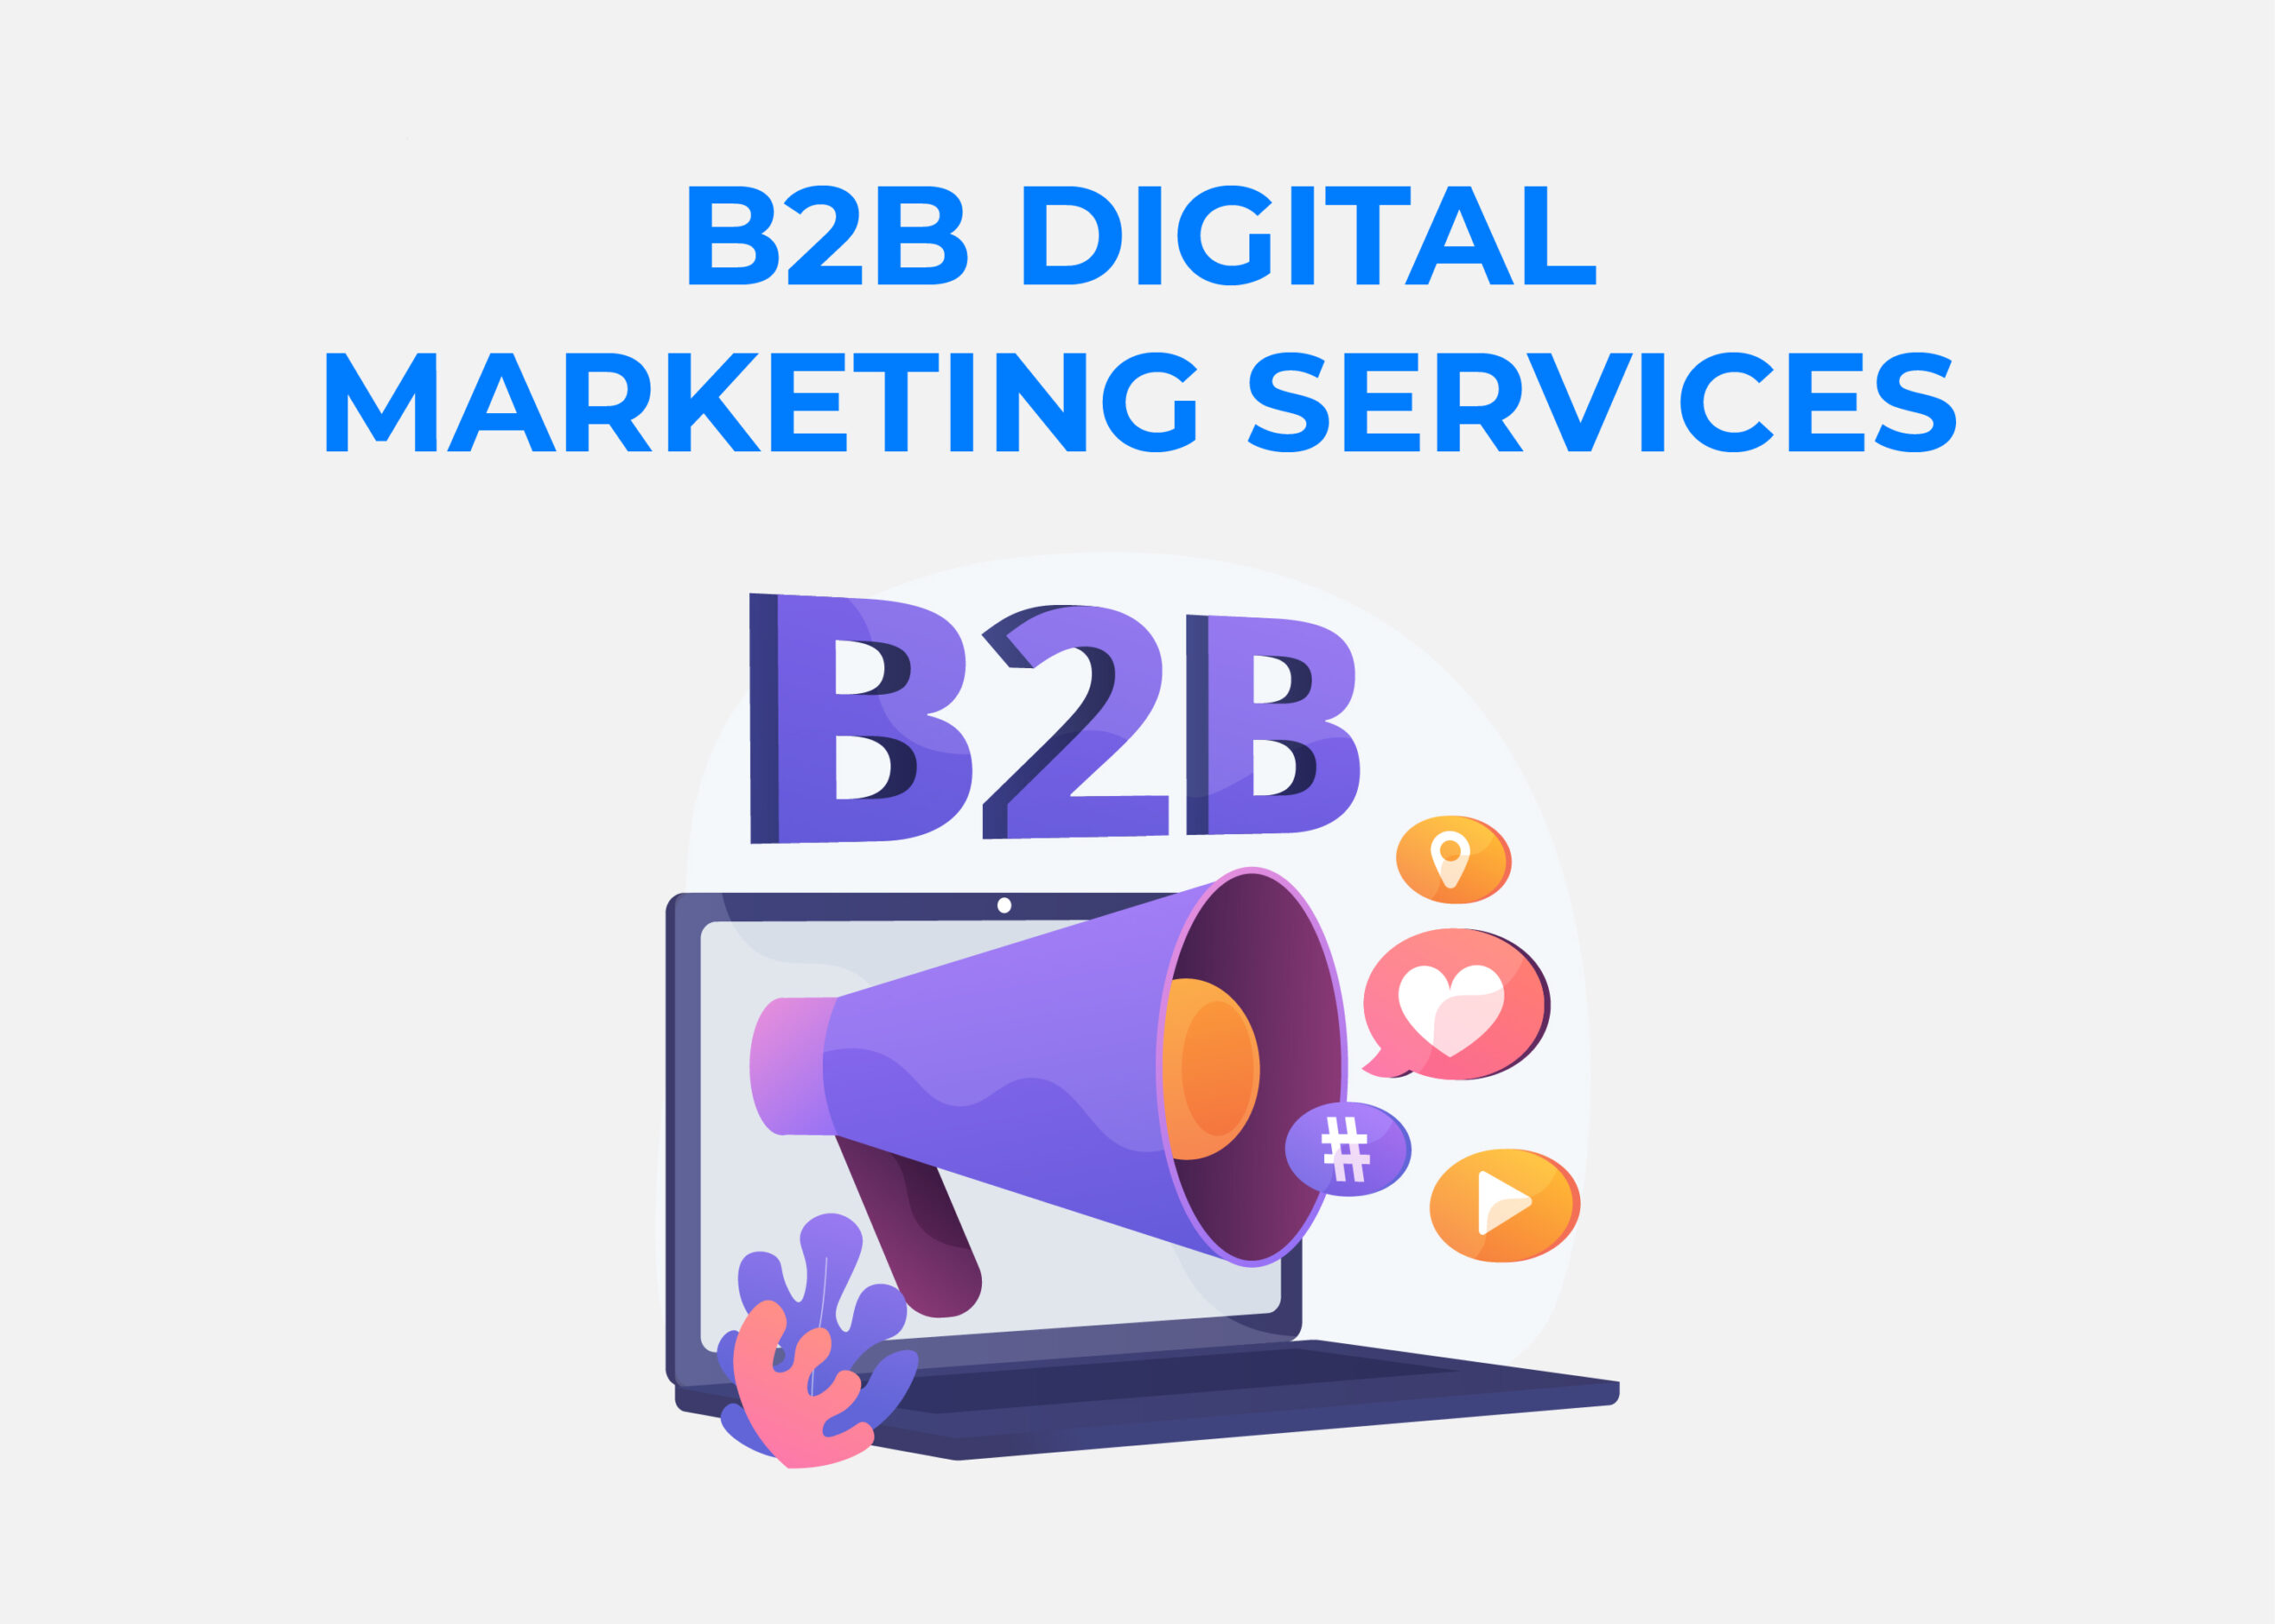 The screen presents a detailed overview of the business-to-business (B2B) digital marketing services and their features